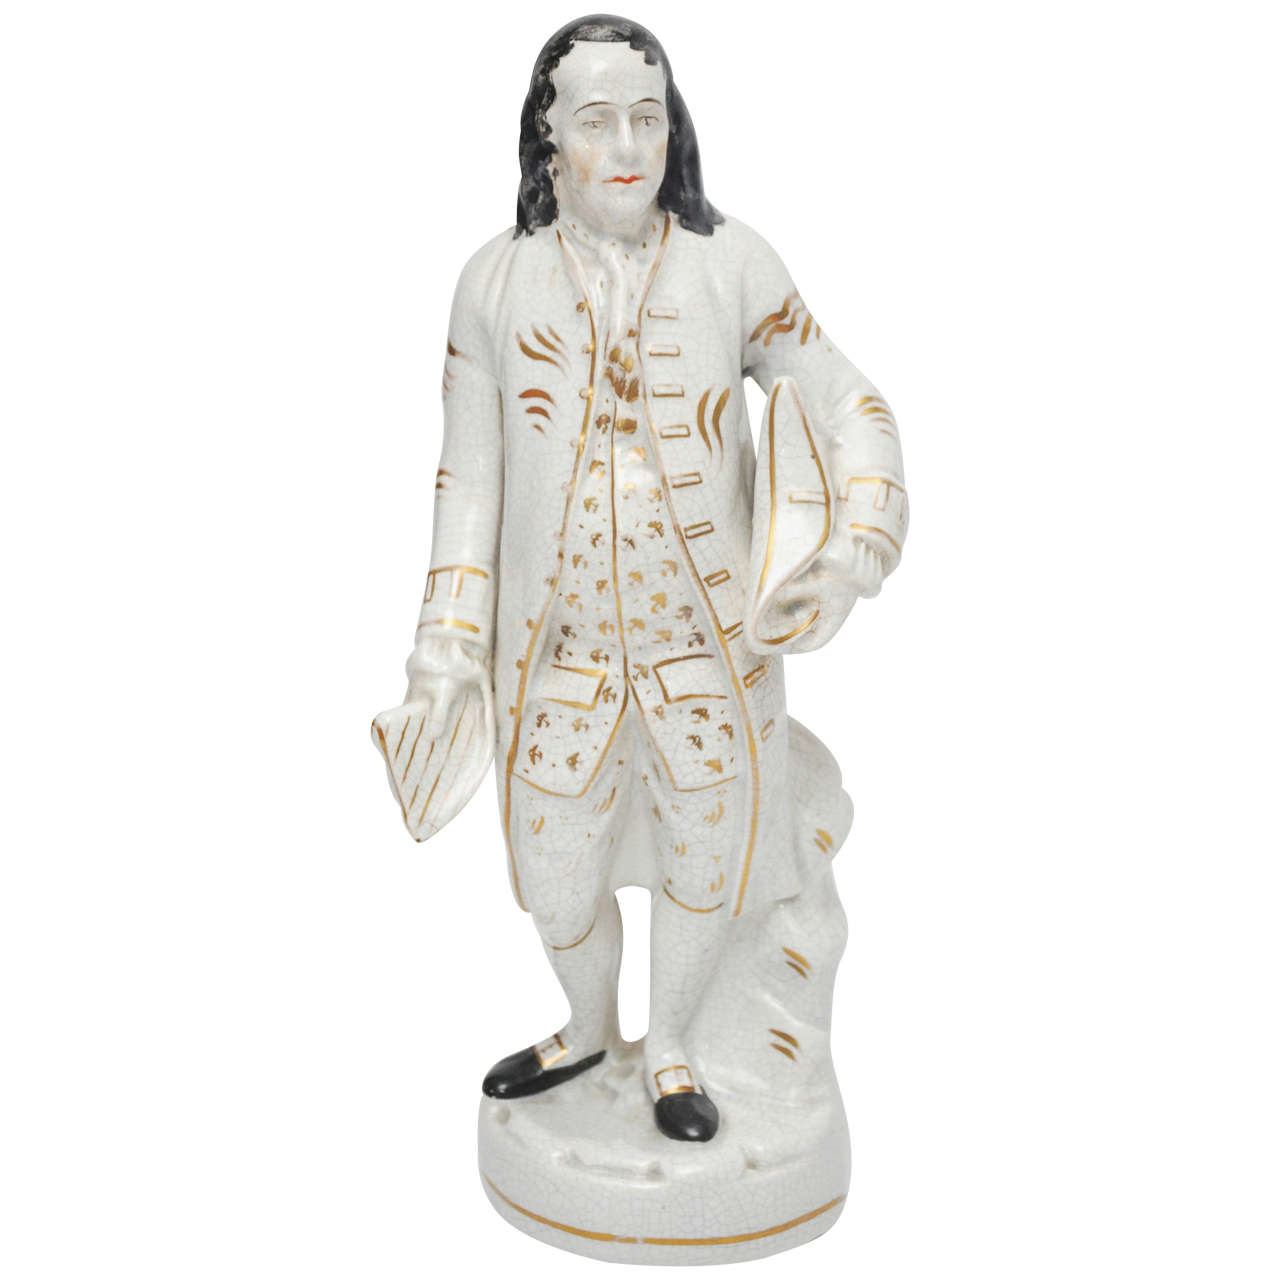 English Staffordshire Decorated Pottery Figure of Ben Franklin, circa 1820